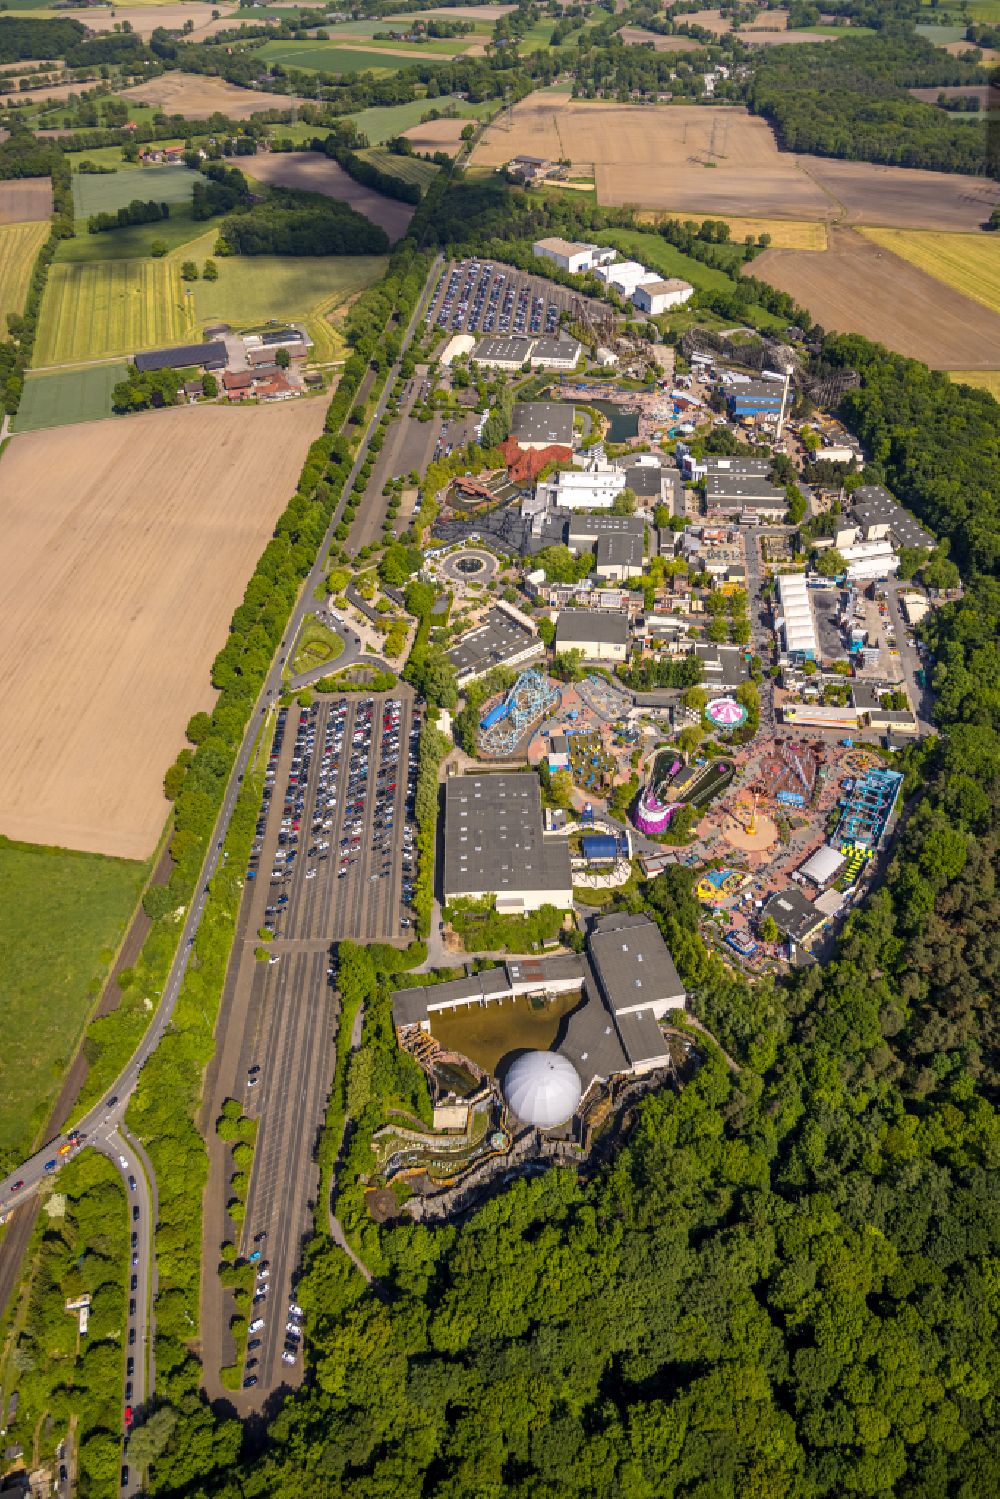 Feldhausen from the bird's eye view: Fun Park Movie Park Germany in Feldhausen in the state of North Rhine-Westphalia. The movie and film themed fun park is closed for the winter